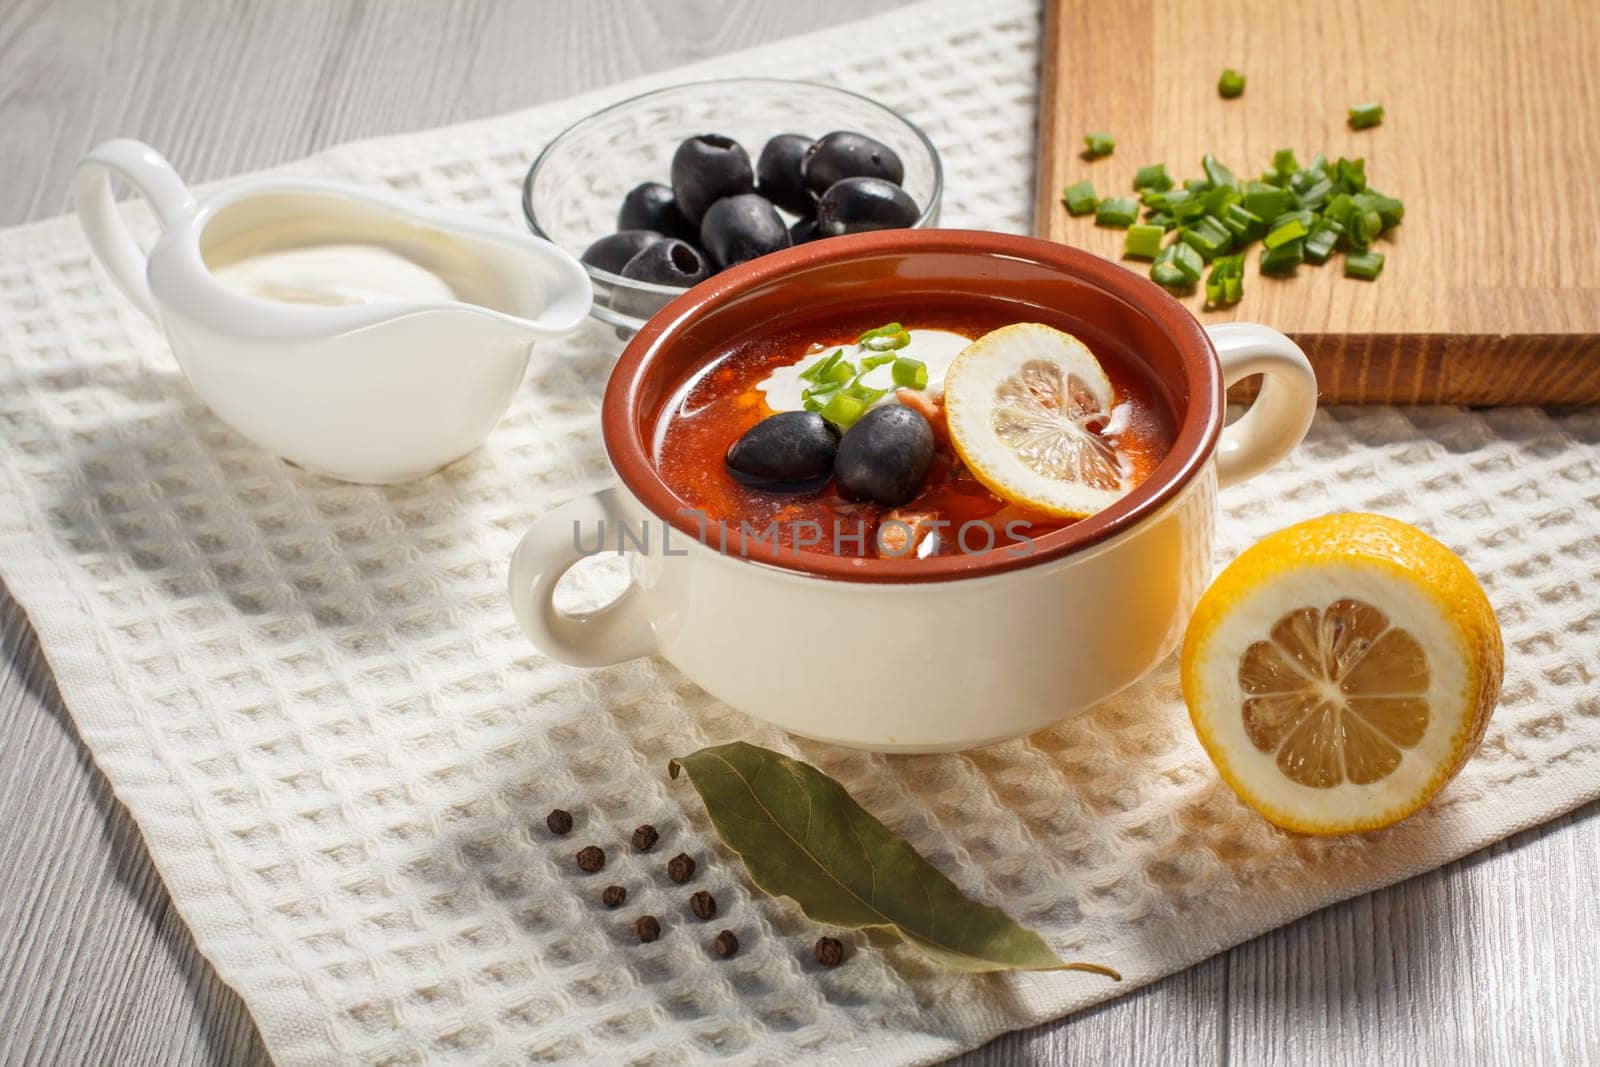 Soup saltwort with meat, smoked sausages, potatoes, tomatoes, marinated pickled cucumber, lemon, black olives and sour cream in ceramic soup bowl with ingredients and peppercorns.